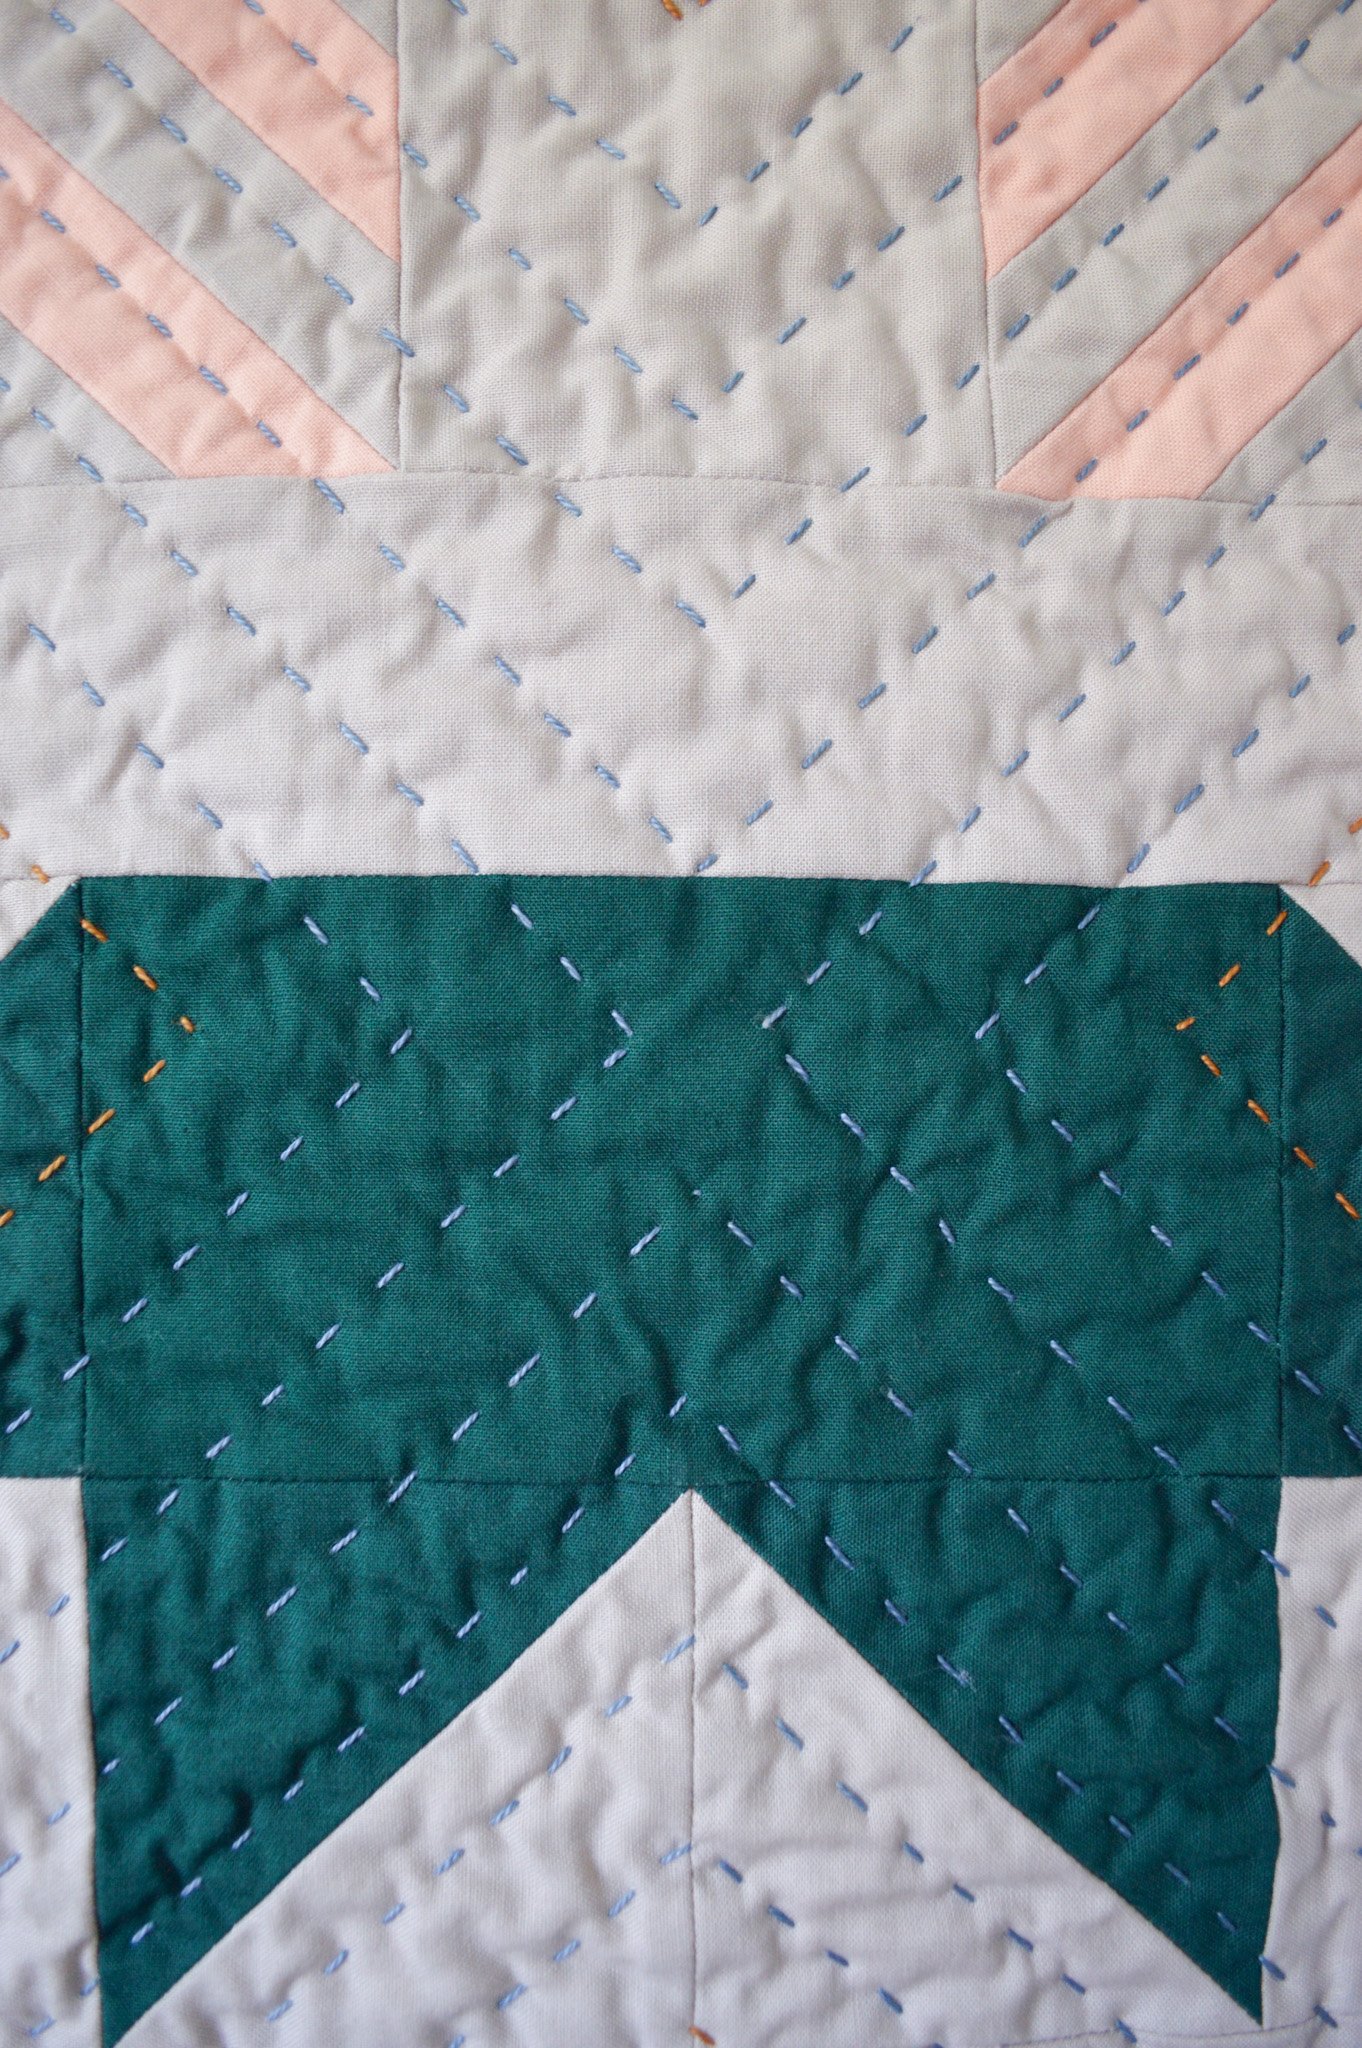  detail of hand quilting on a modern mini quilt 